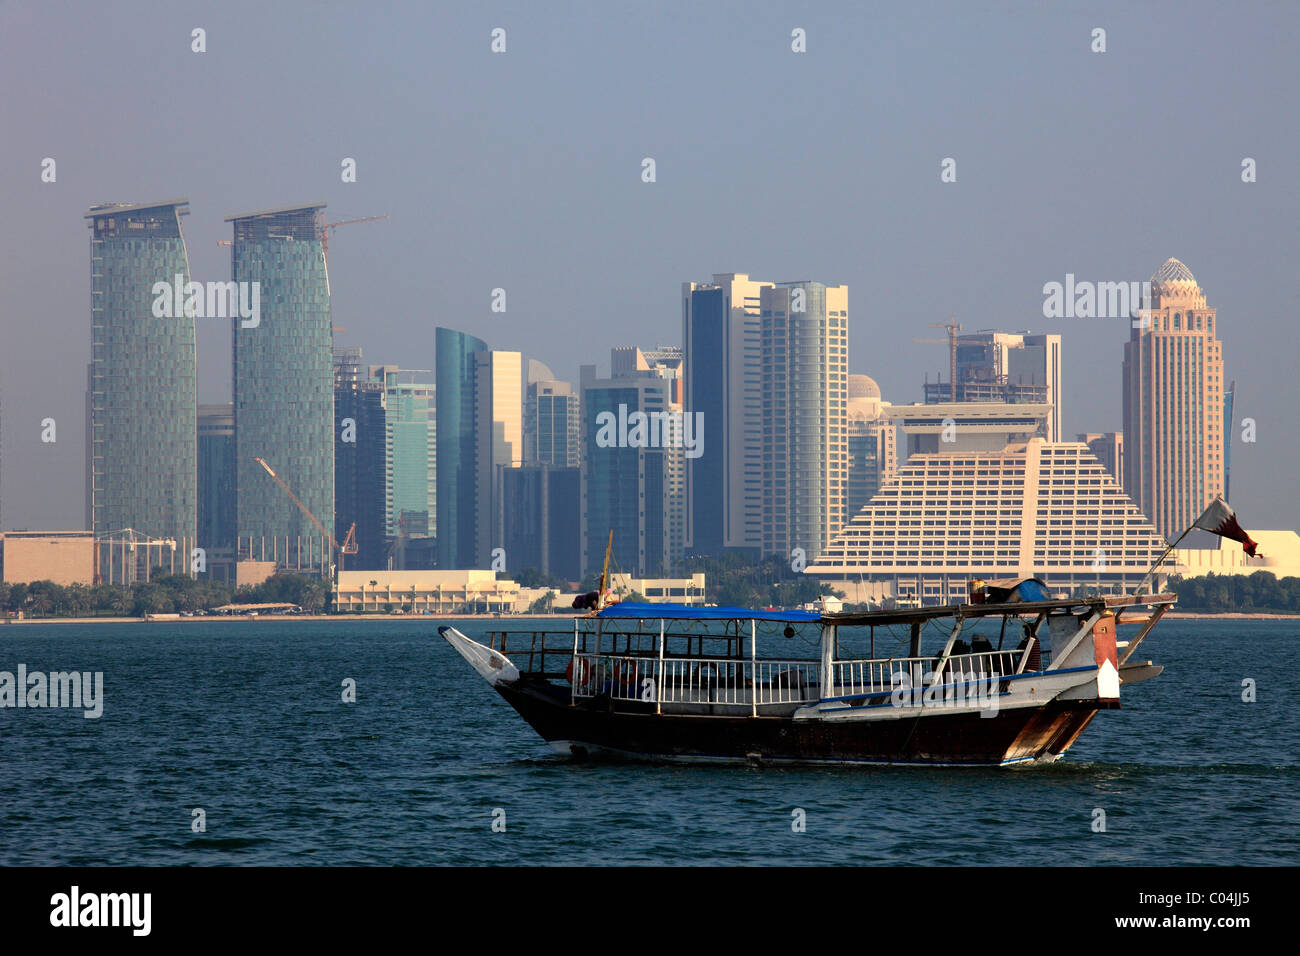 Qatar, Doha, skyline, skyscrapers, general view, dhow, traditional boat, Stock Photo